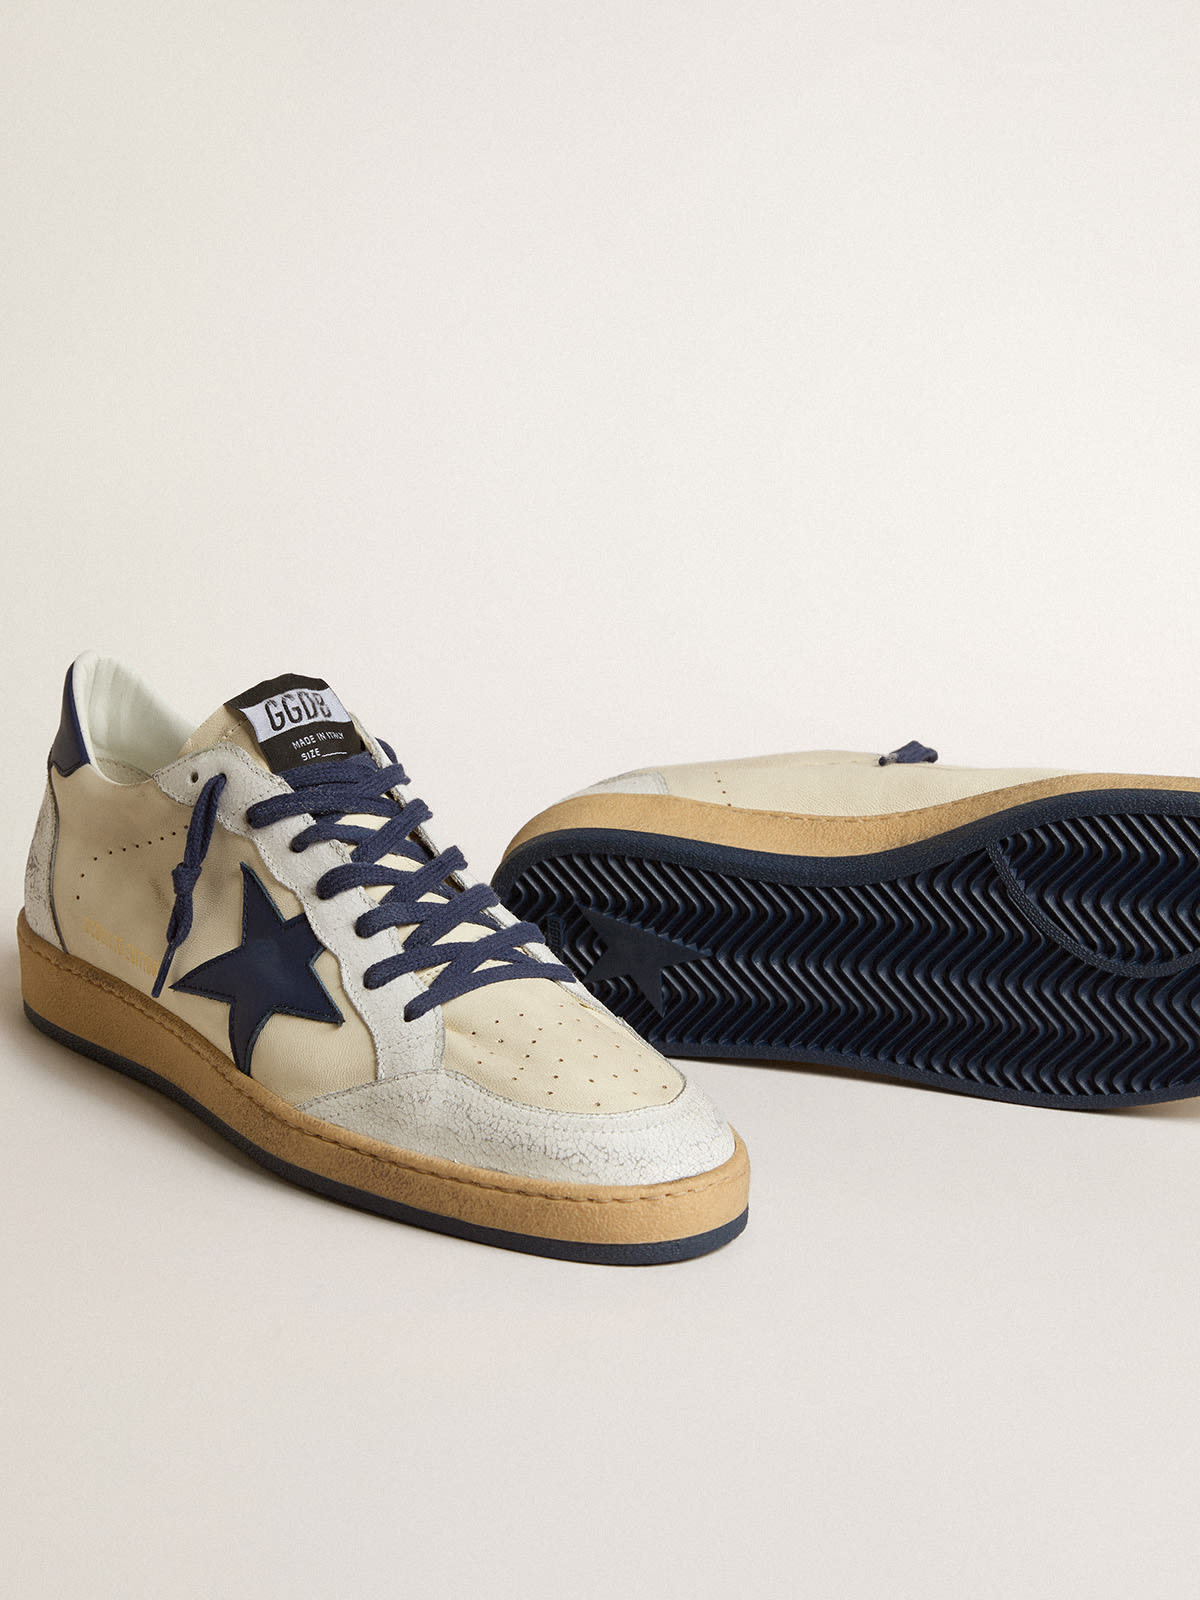 Golden Goose - Ball Star LTD in cream nappa with blue leather star and heel tab in 